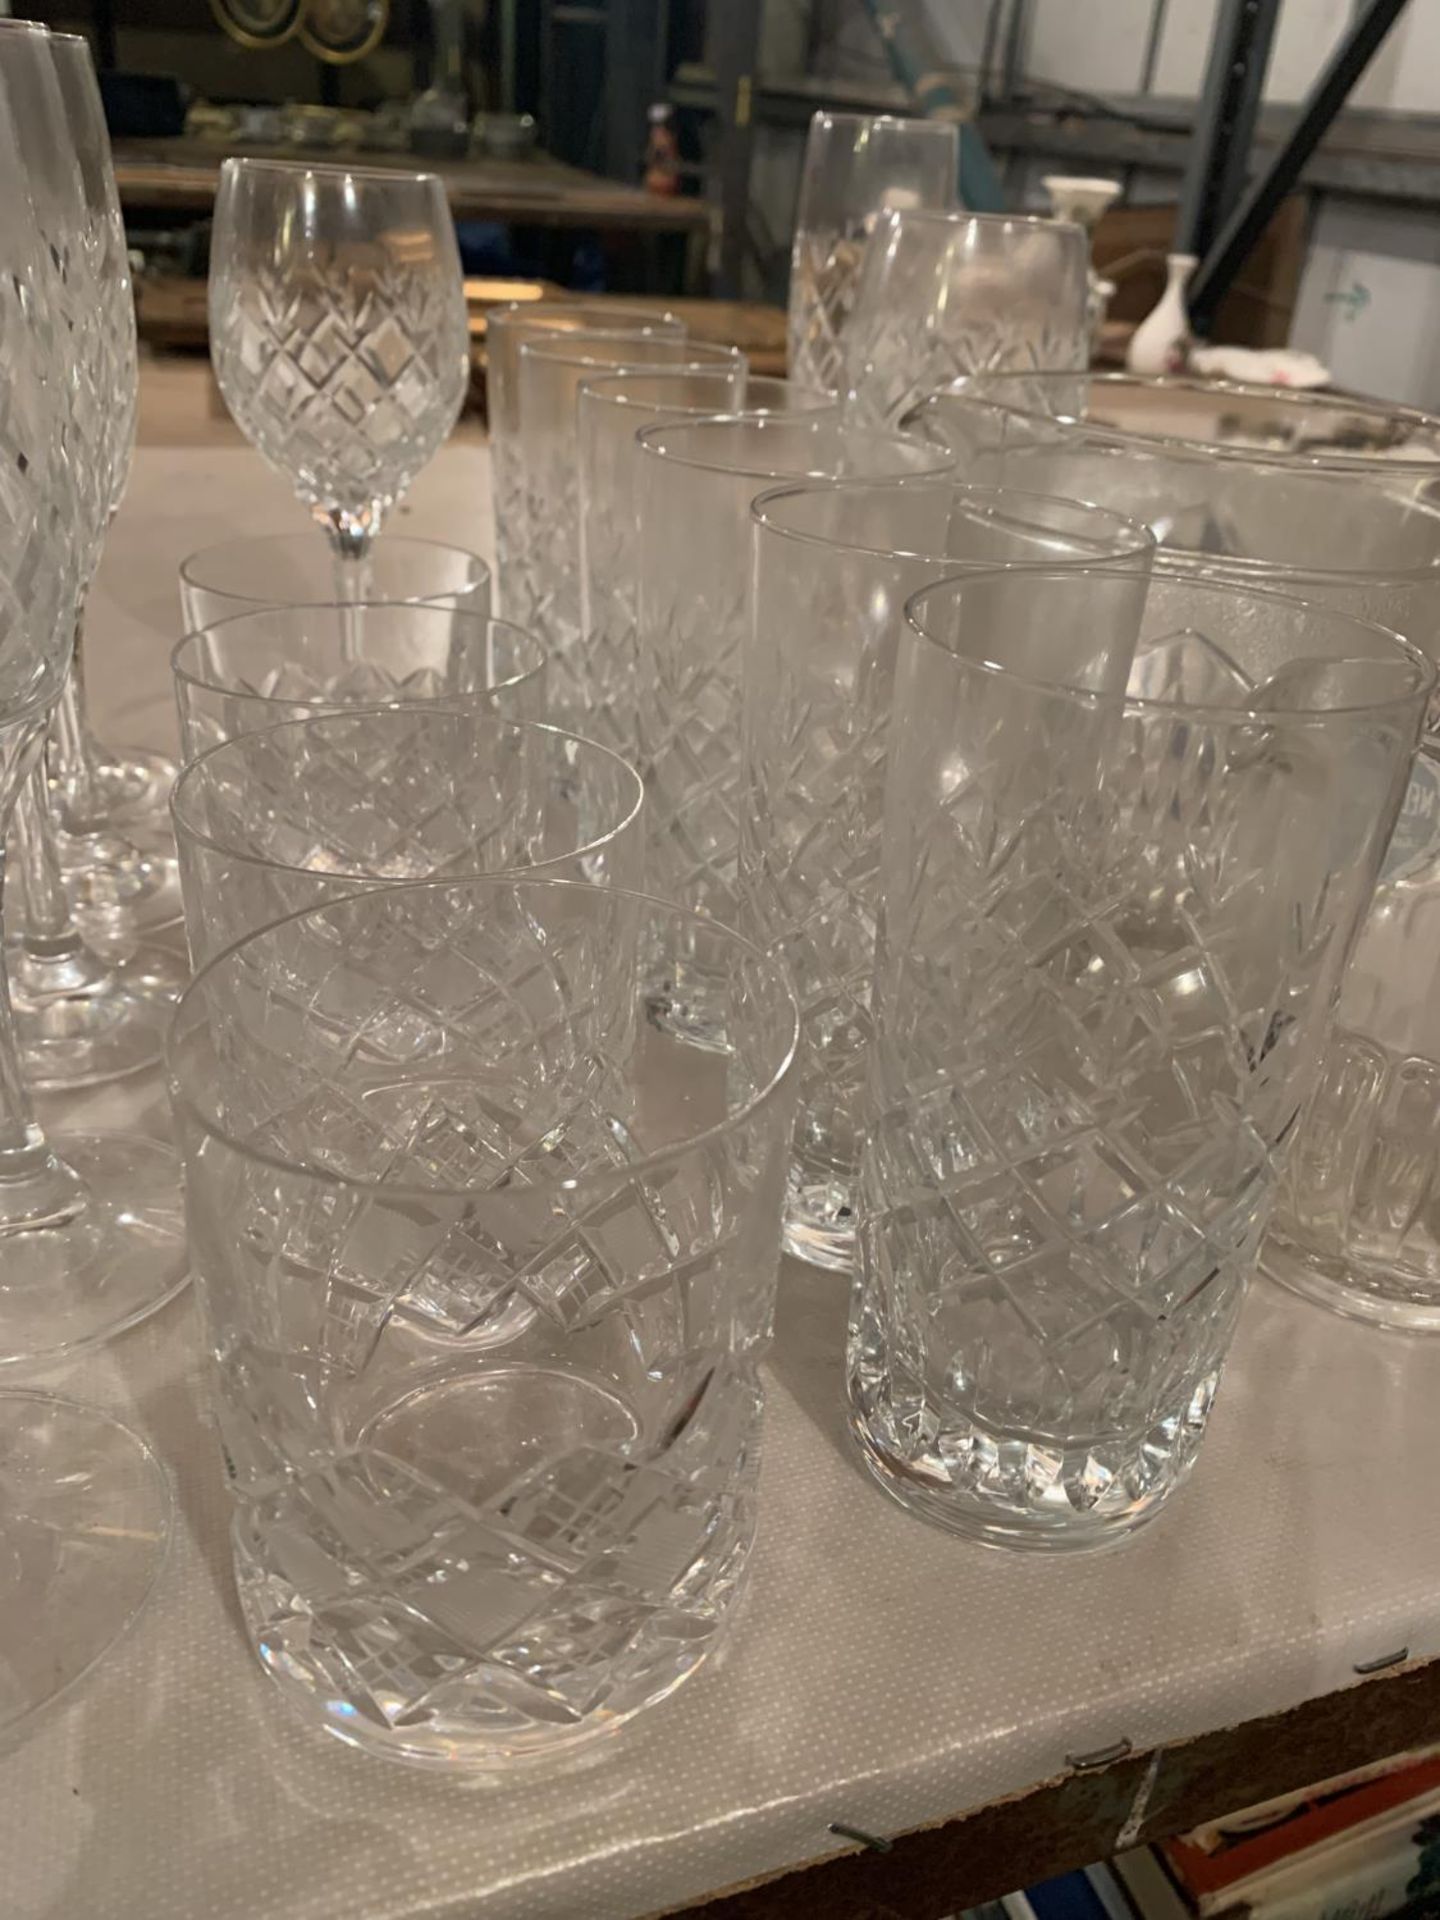 A COLLECTION OF GLASSES TO INCLUDE STEMMED WINE AND CHAMPAGNE GLASSES, WHISKEY TUMBLERS AND A NELSON - Image 4 of 4